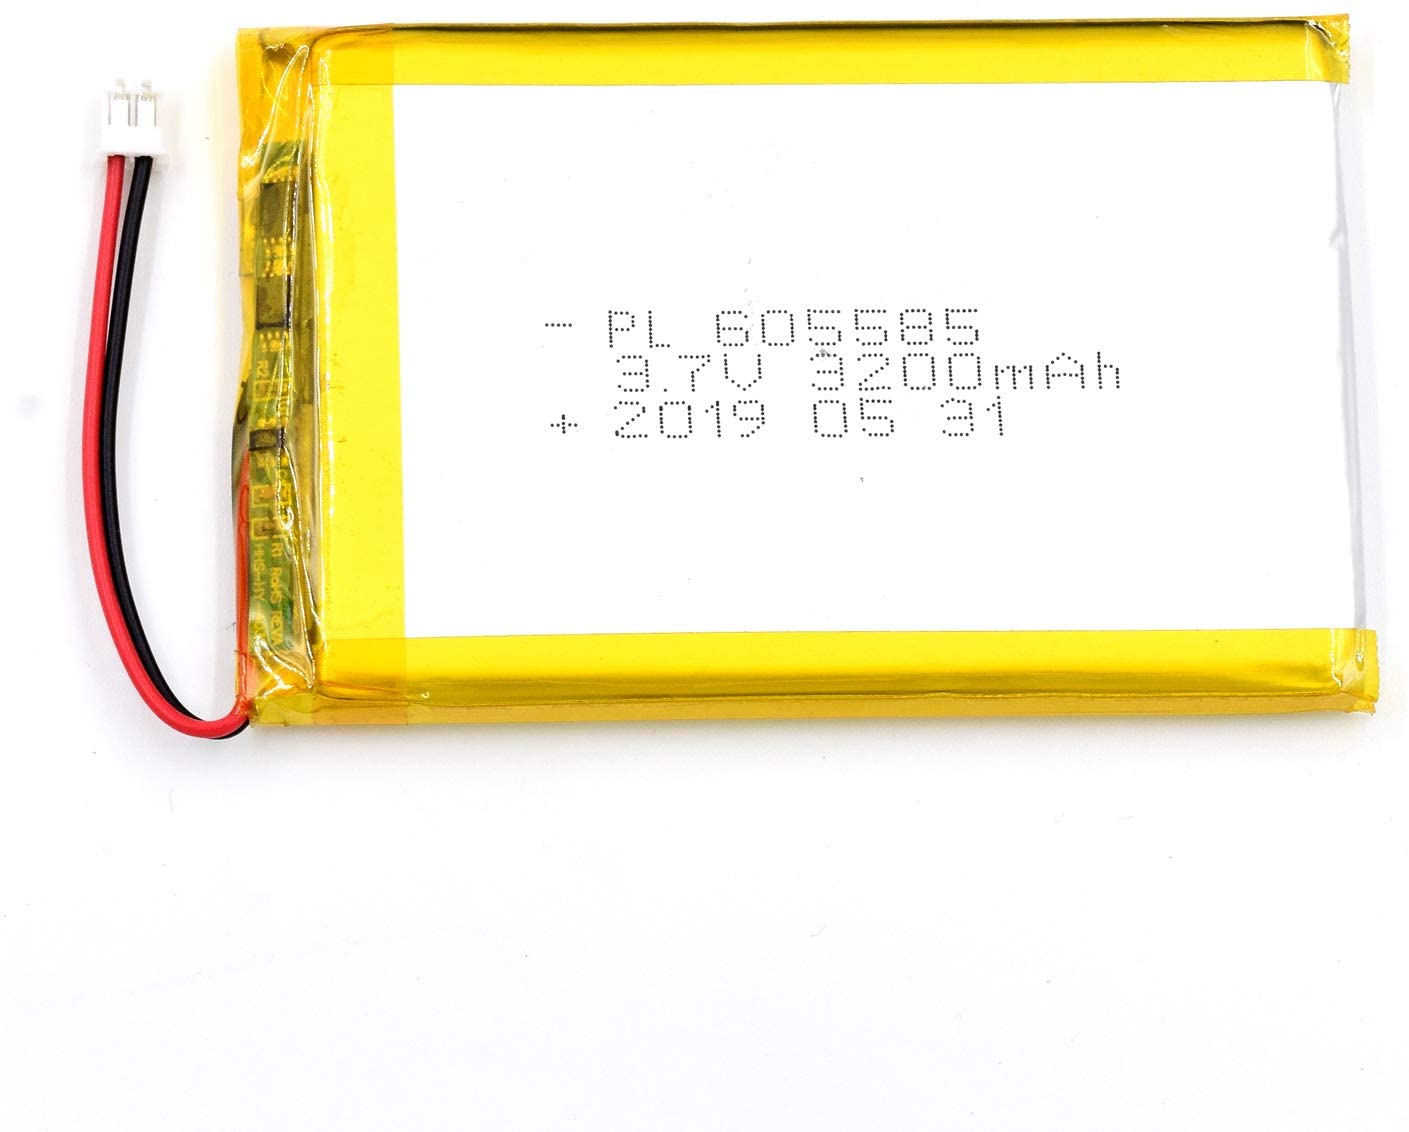 YDL 3.7V 3200mAh 605585 Rechargeable Polymer Lithium-Ion Battery Length 87mm